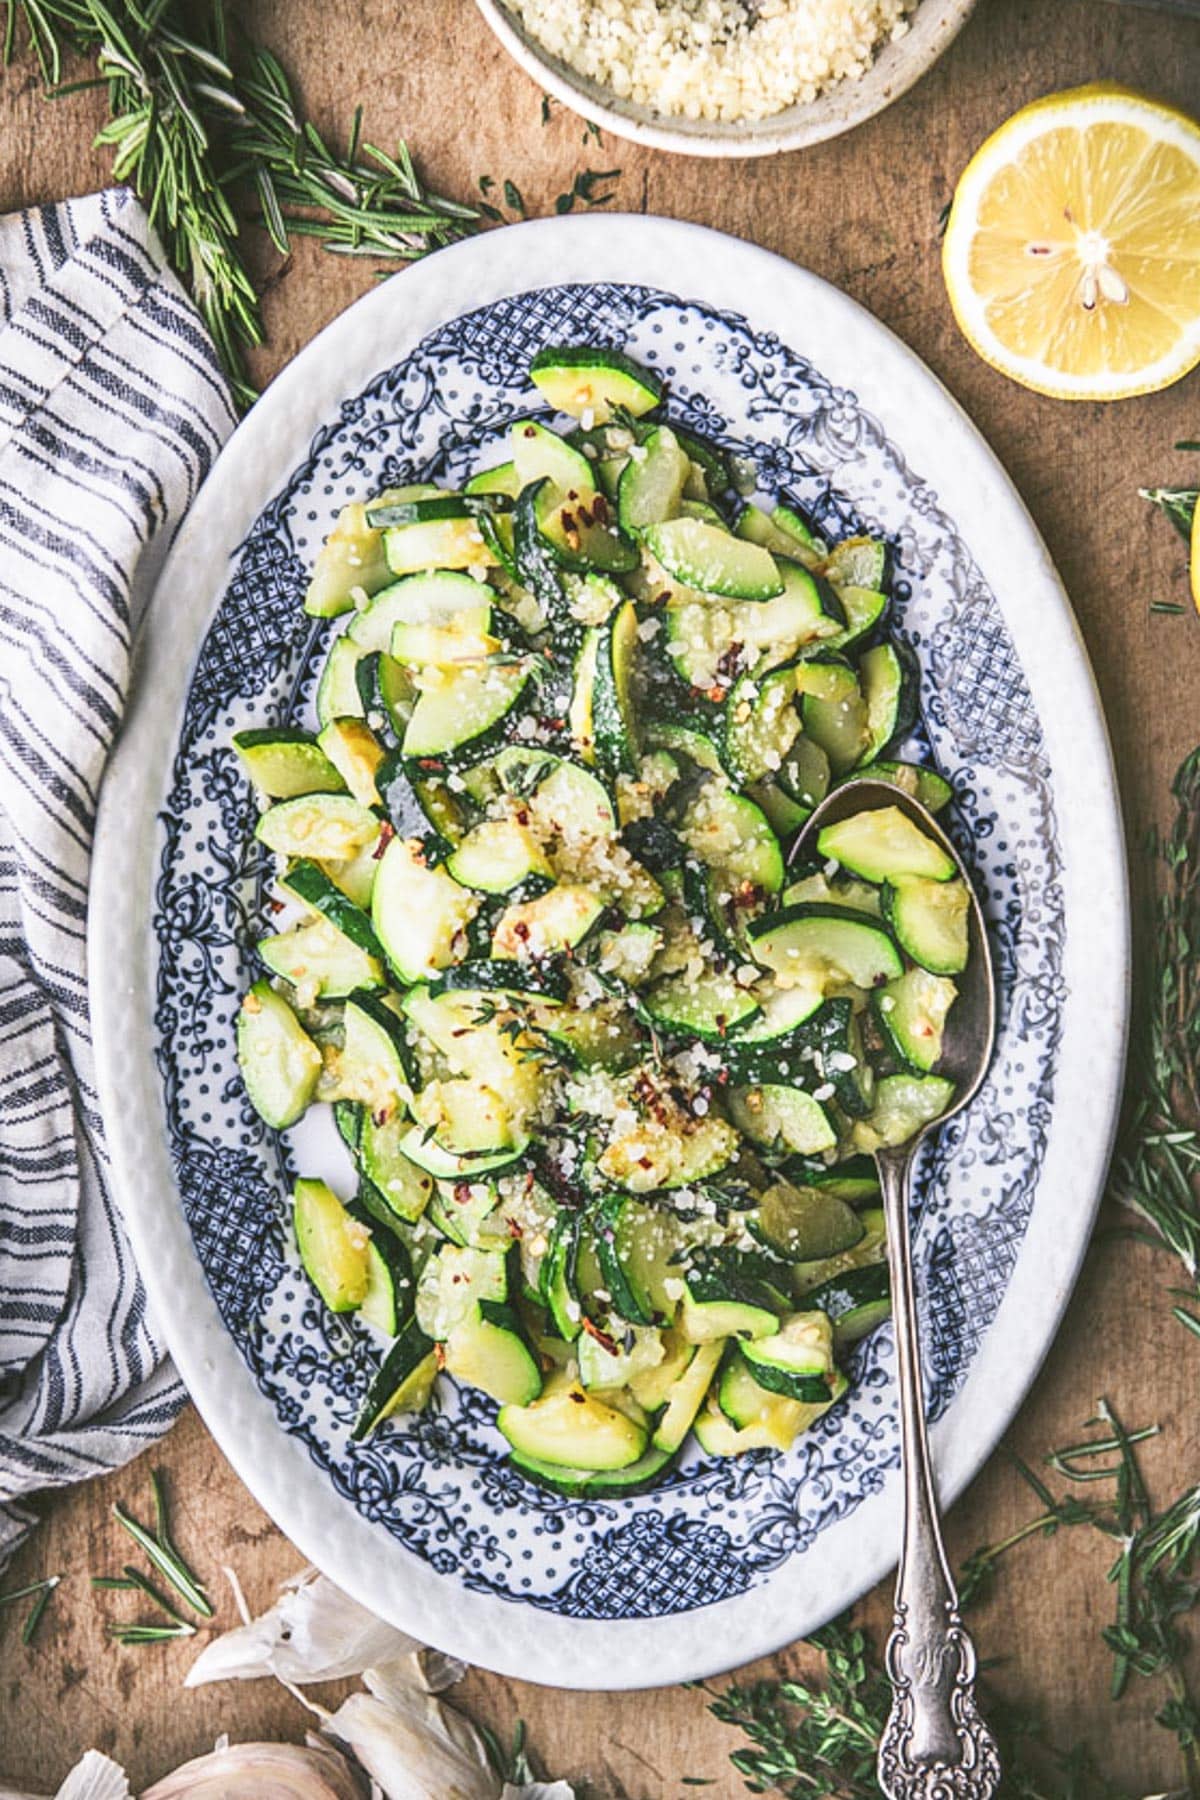 Sauteed zucchini on a blue and white plate with a serving spoon.